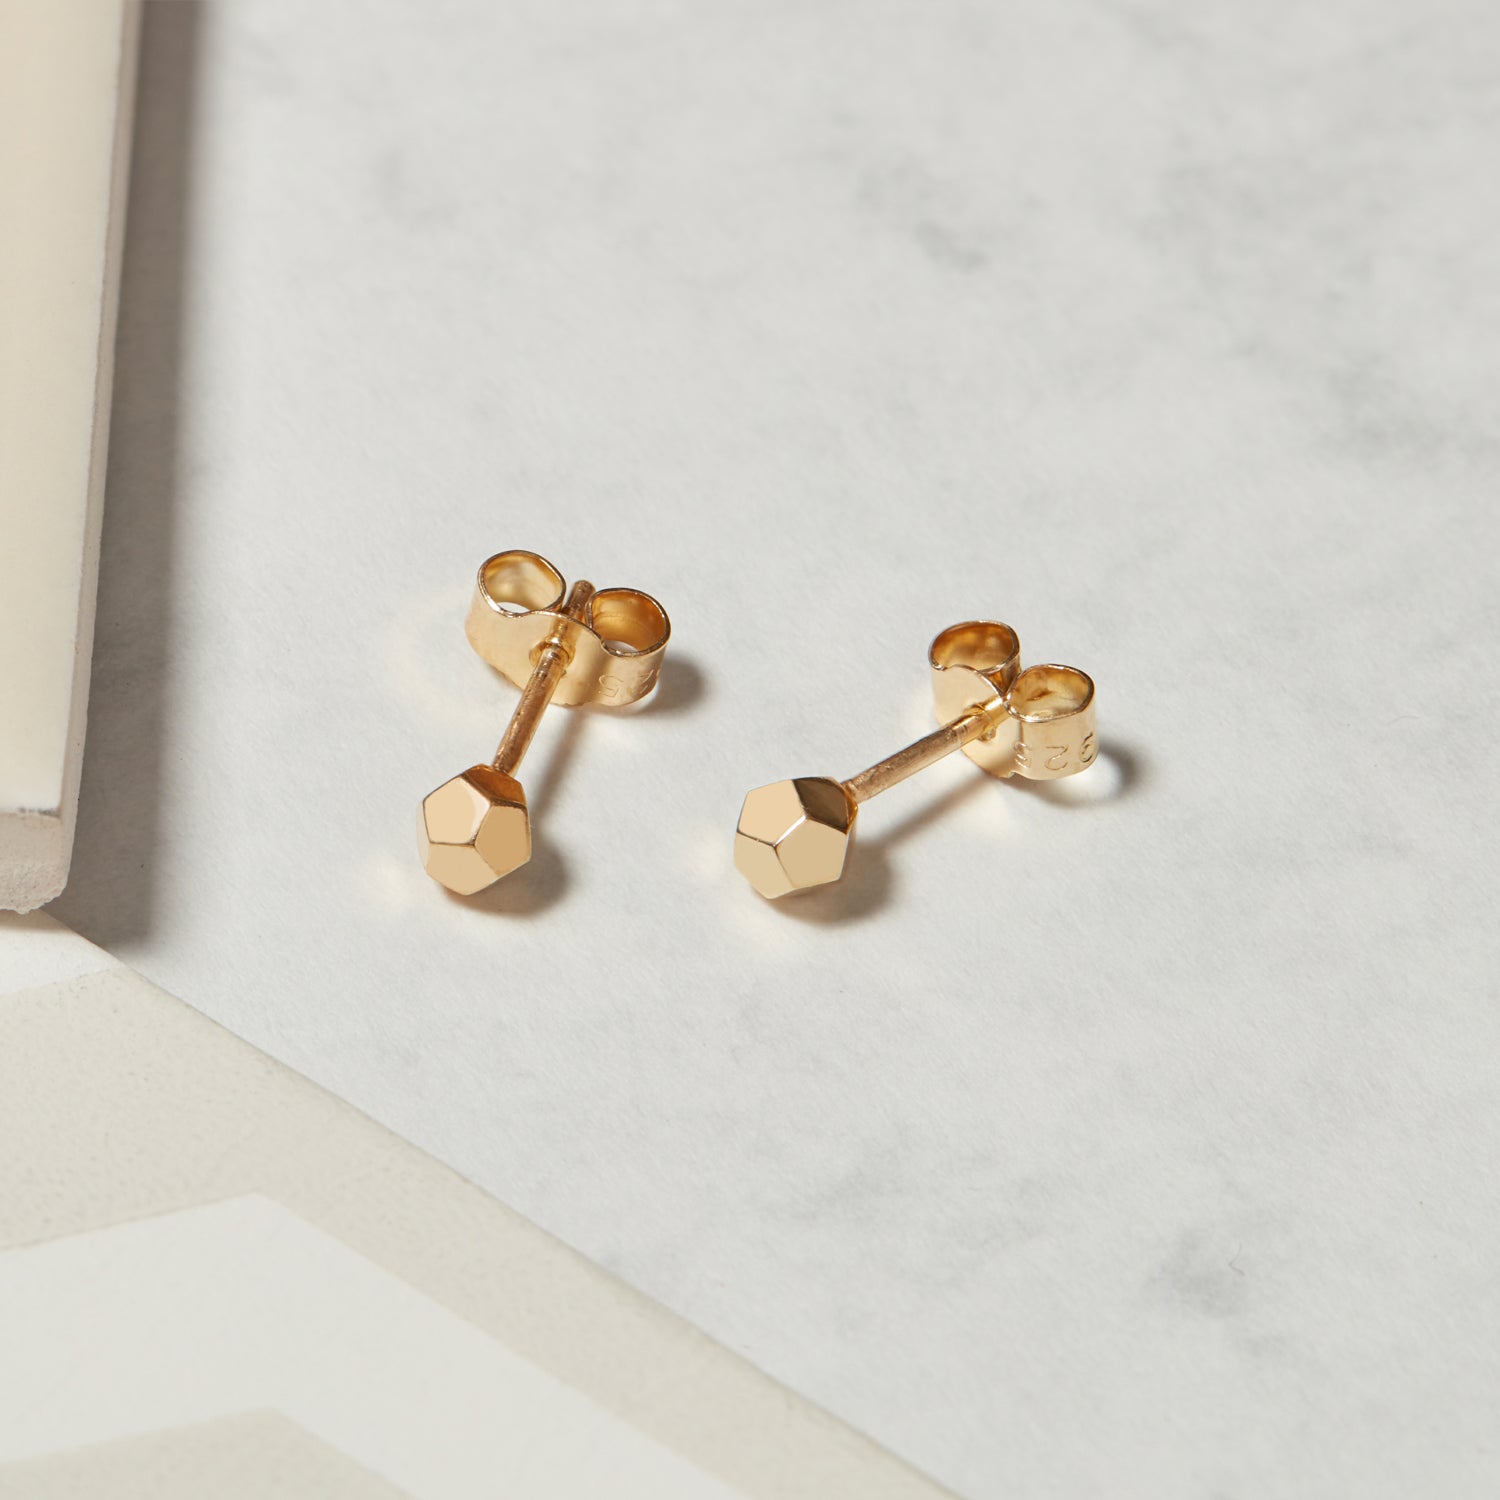 Dodecahedron Stud Earrings - 9k Yellow Gold